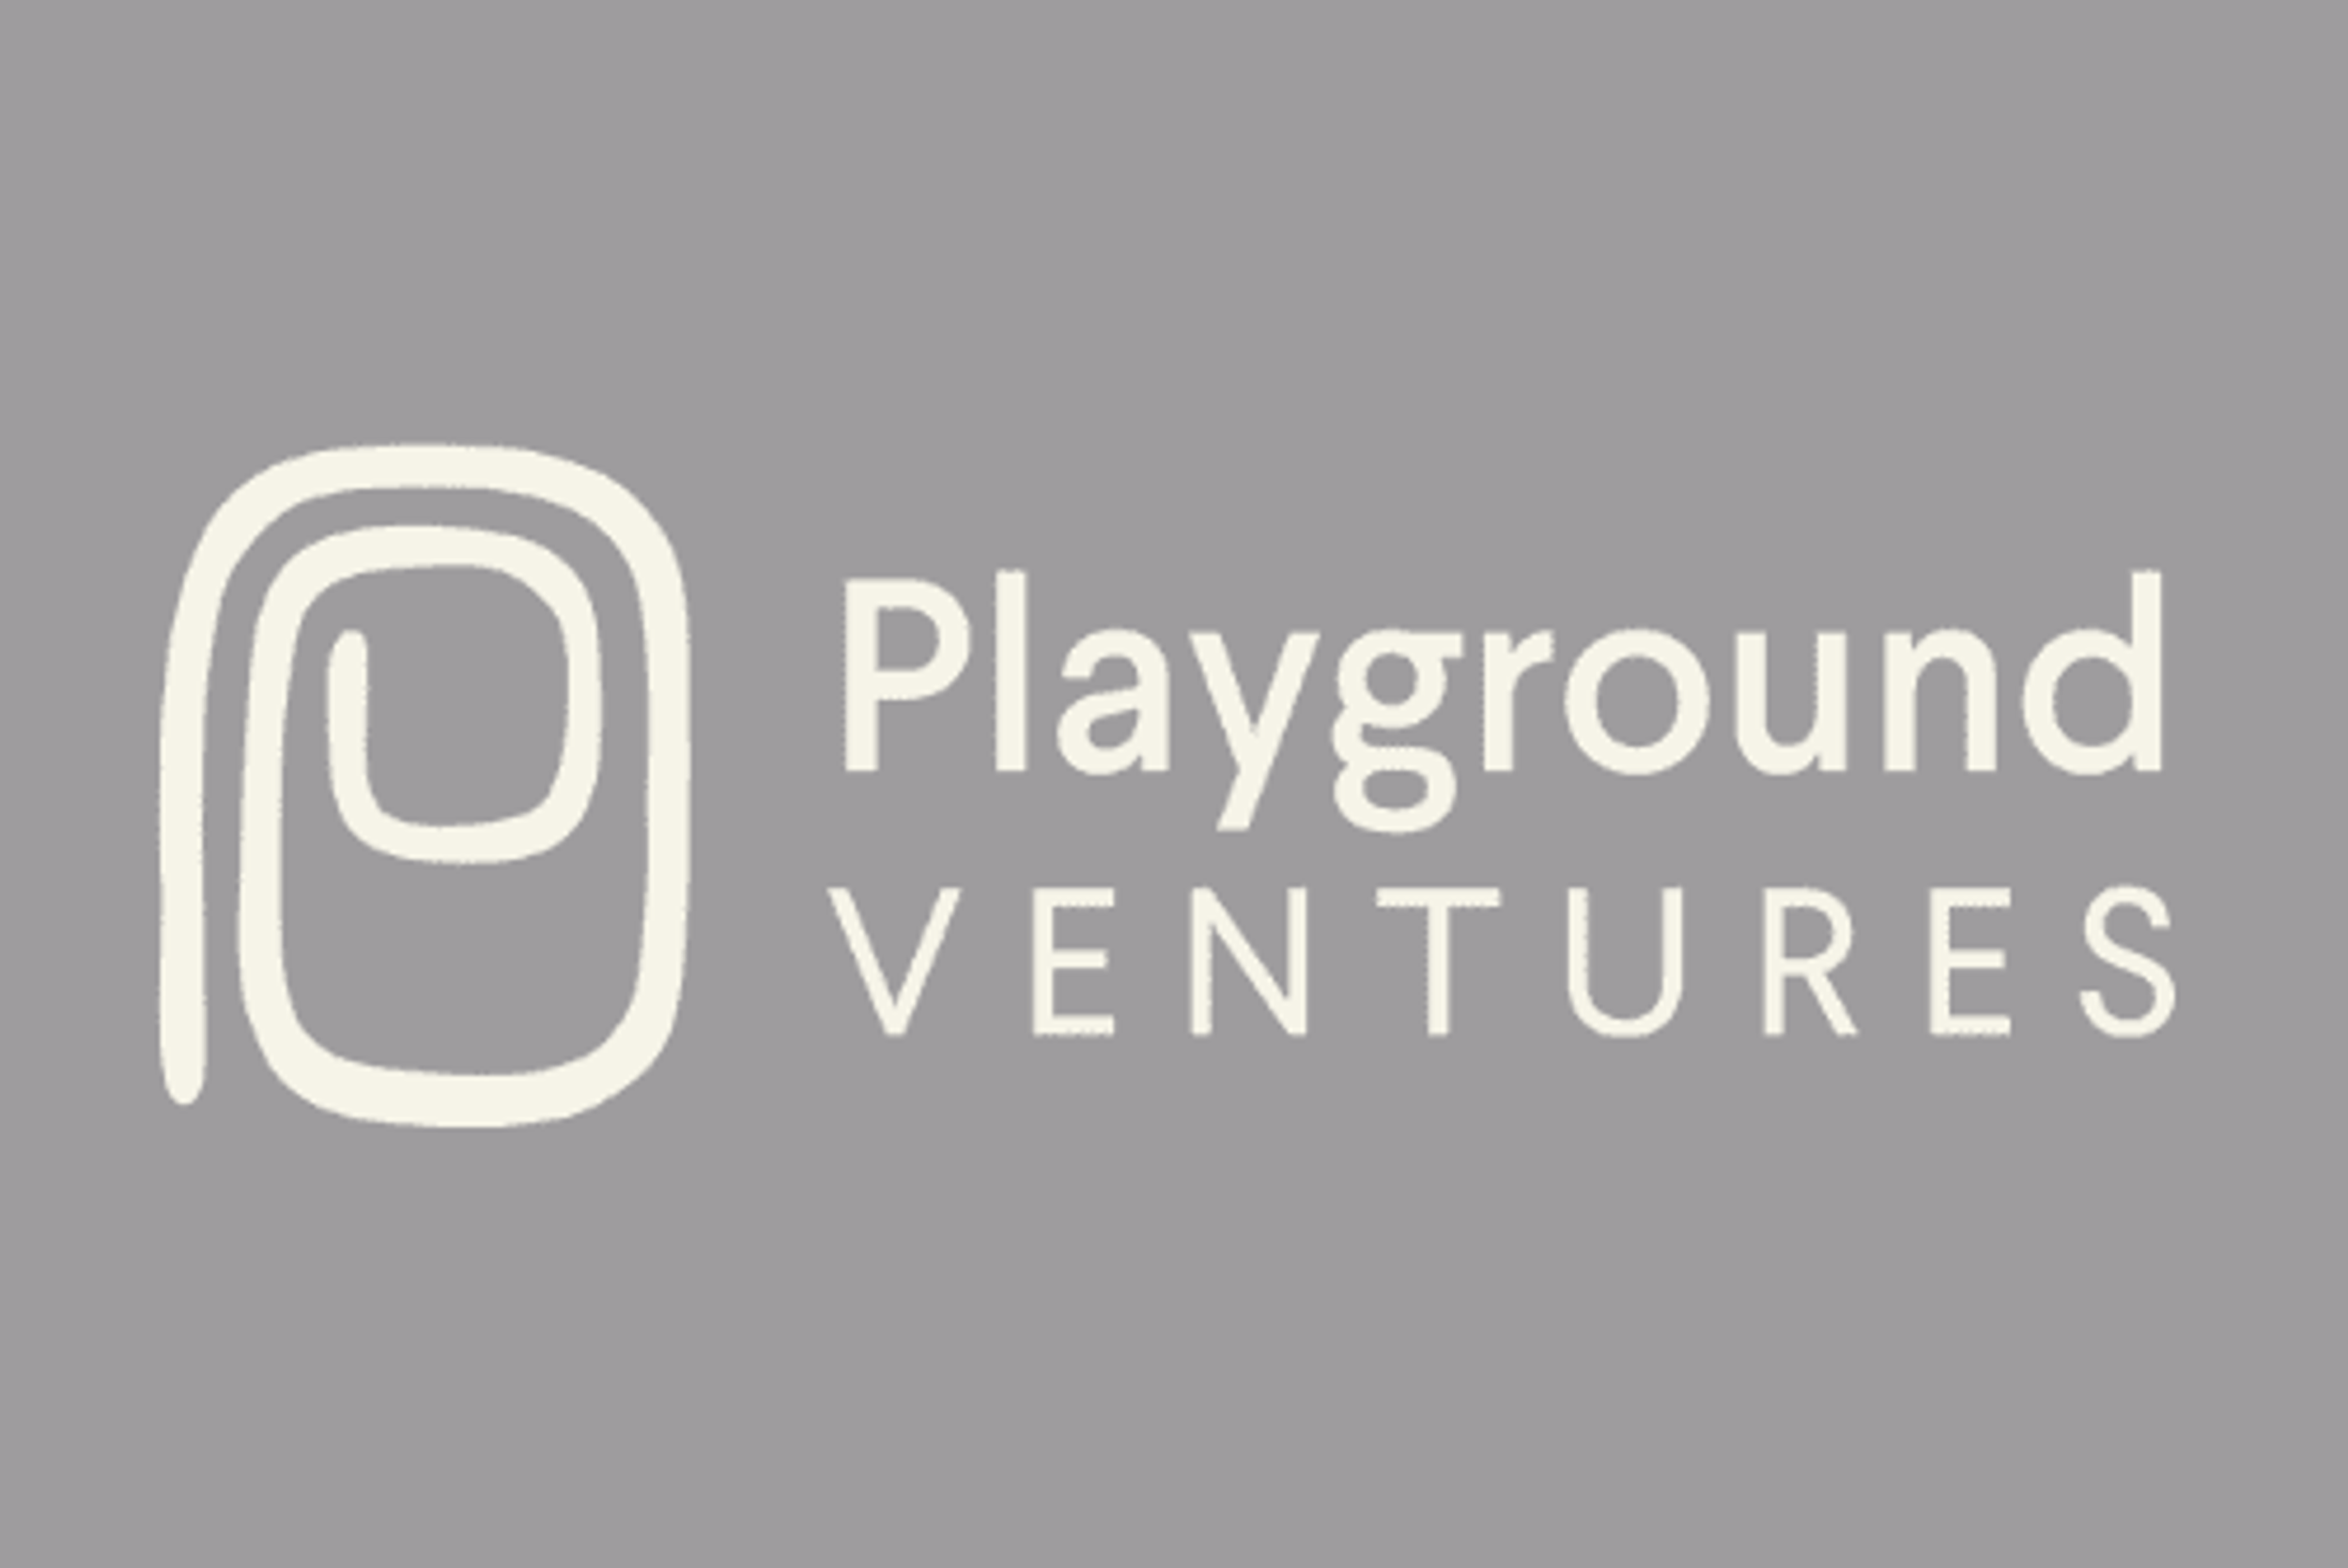 Emma Fairhurst Filing of Early Warning Report Related to Acquisition of Common Shares Playground Ventures Inc.